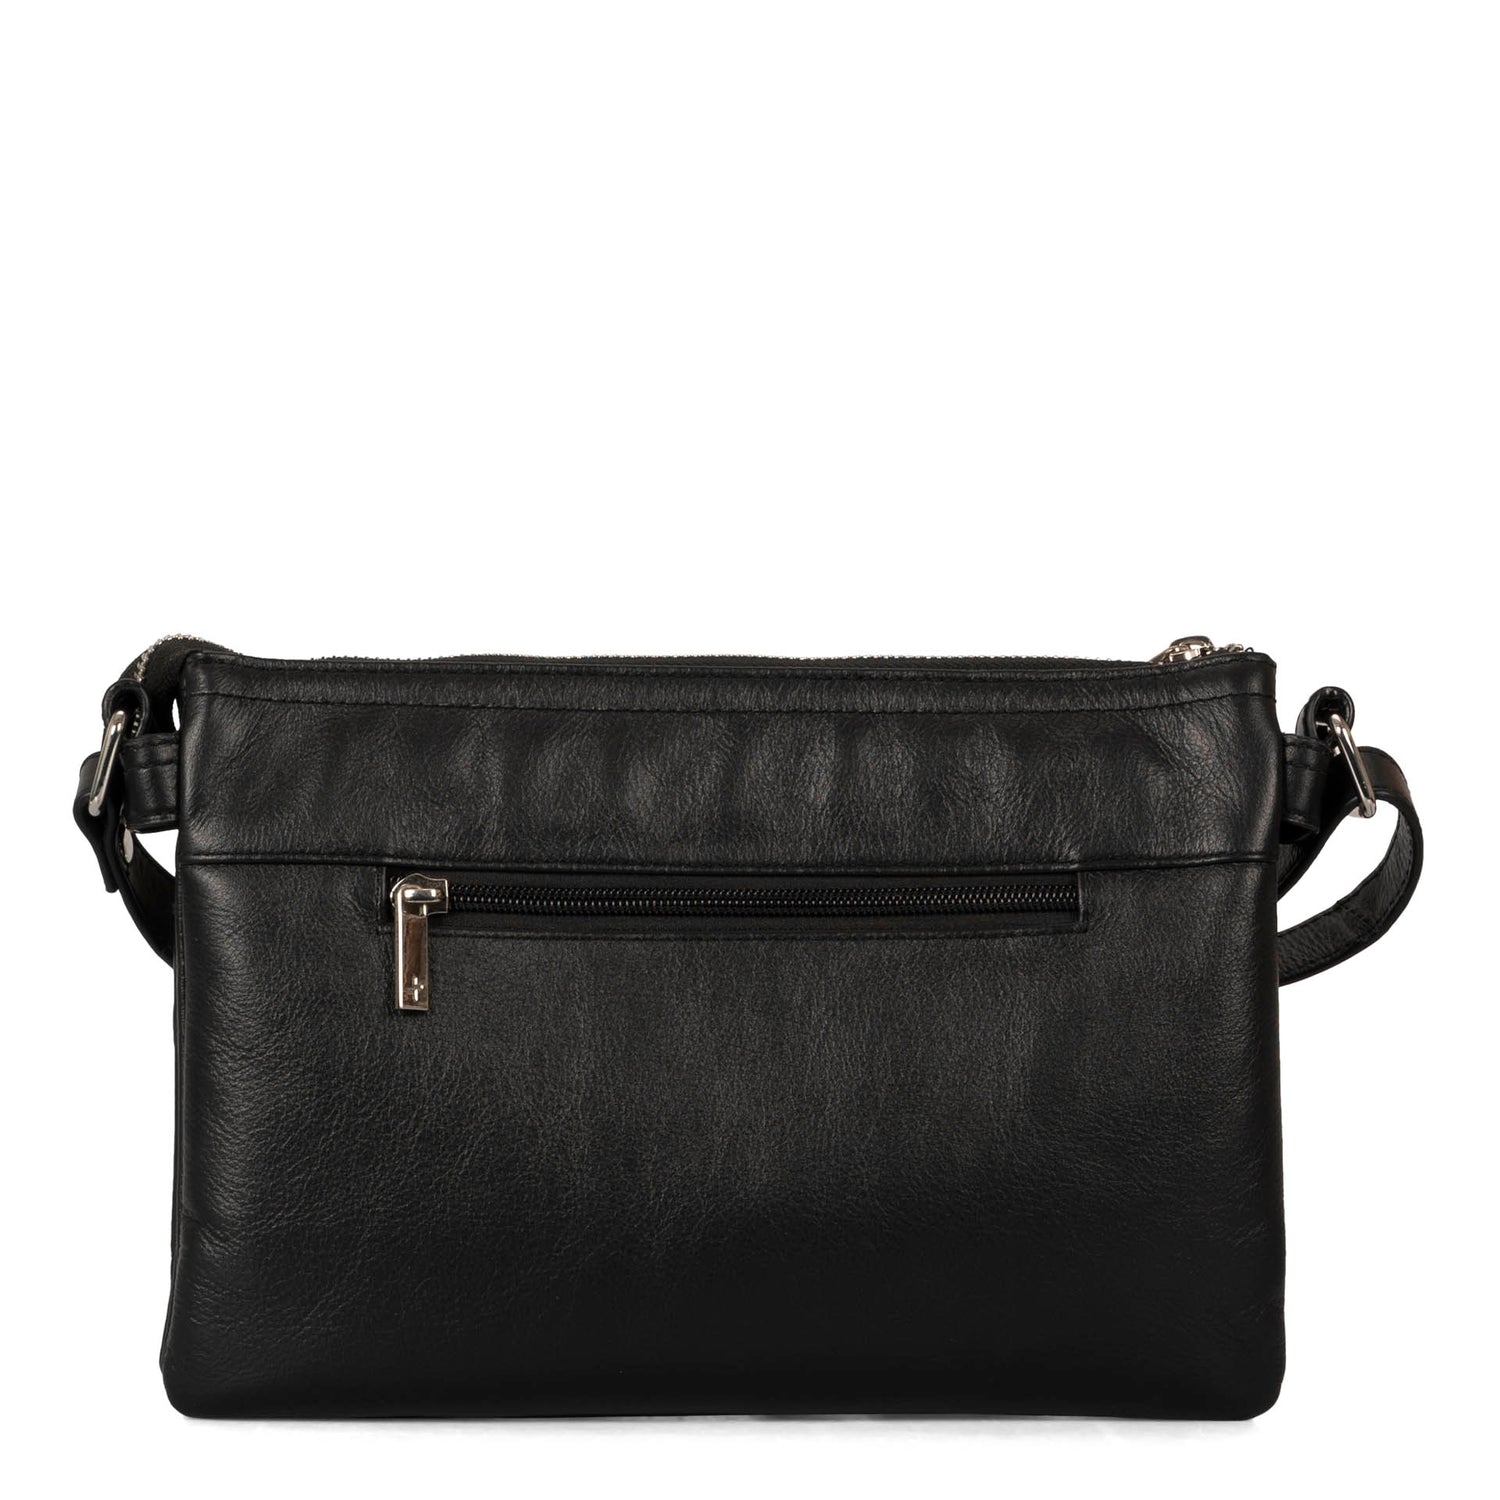 Front view of a black crossbody bag called Basics designed by Tracker showing its supple leather texture and zipper pocket.